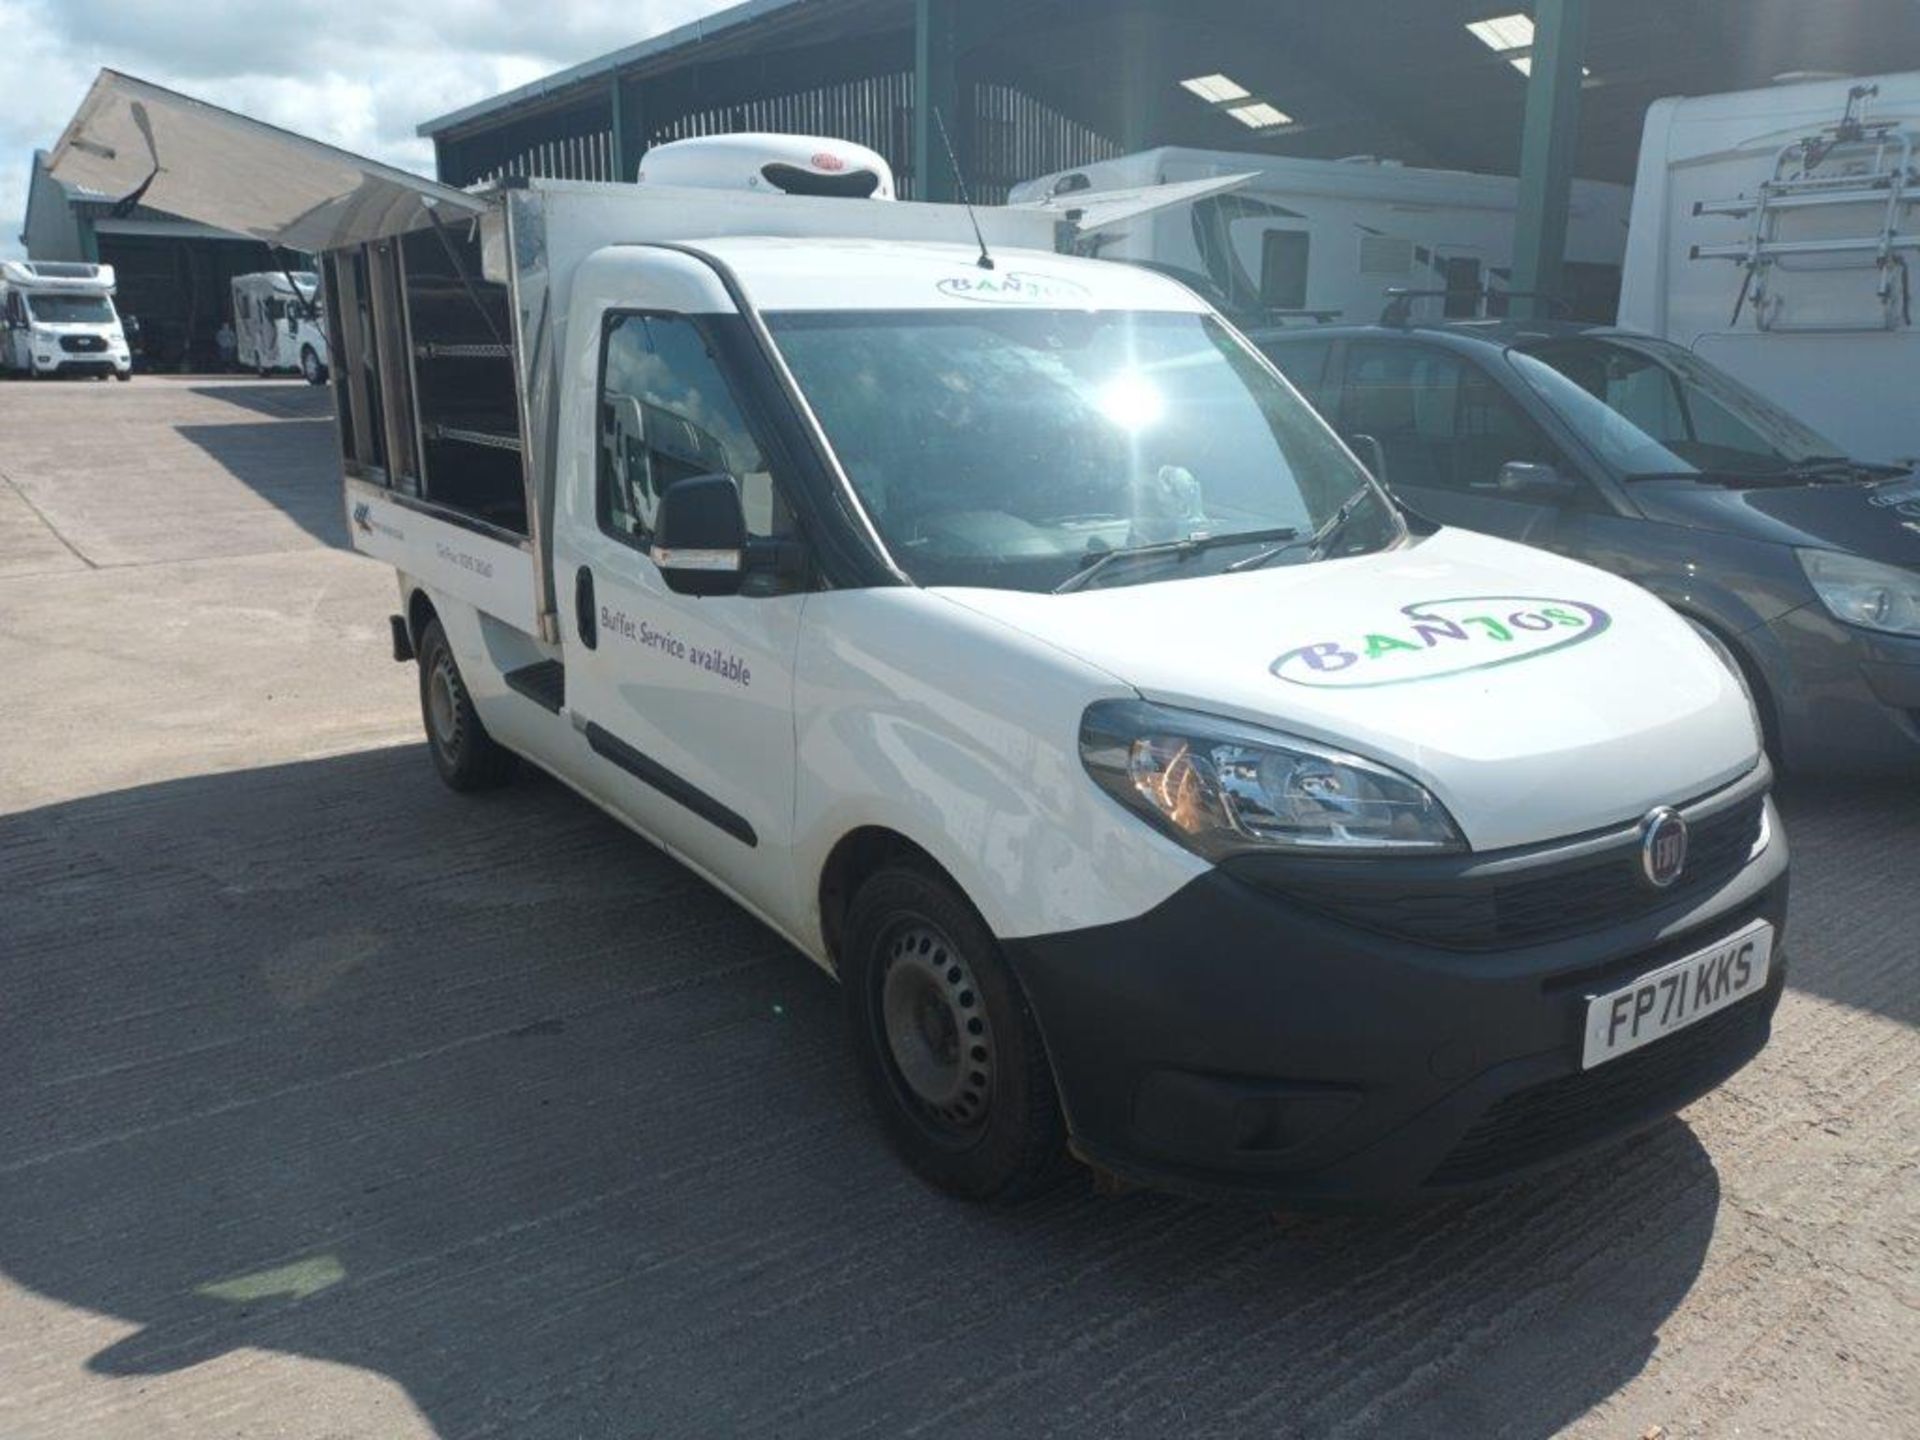 Fiat Doblo 16V MULTIJET II Optimus Primo Maxi insulated and refrigerated sandwich catering van,